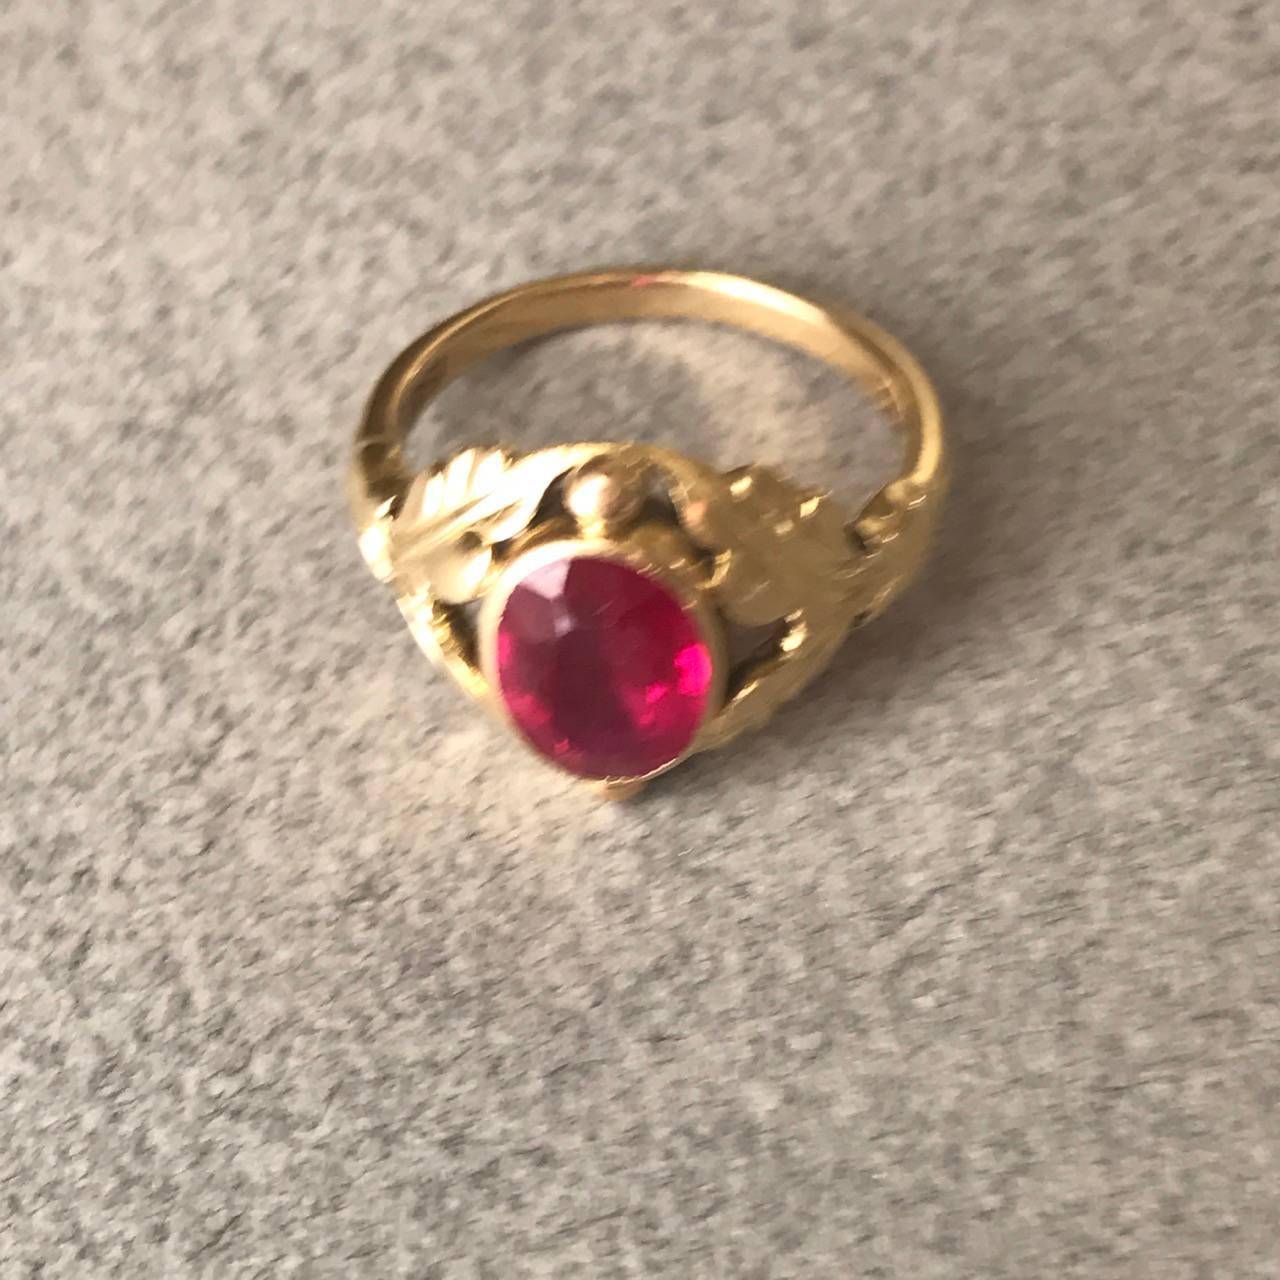 Women's or Men's Georg Jensen 18 Karat Gold Ring with Synthetic Ruby No. 208 (Size 5.5 ) For Sale